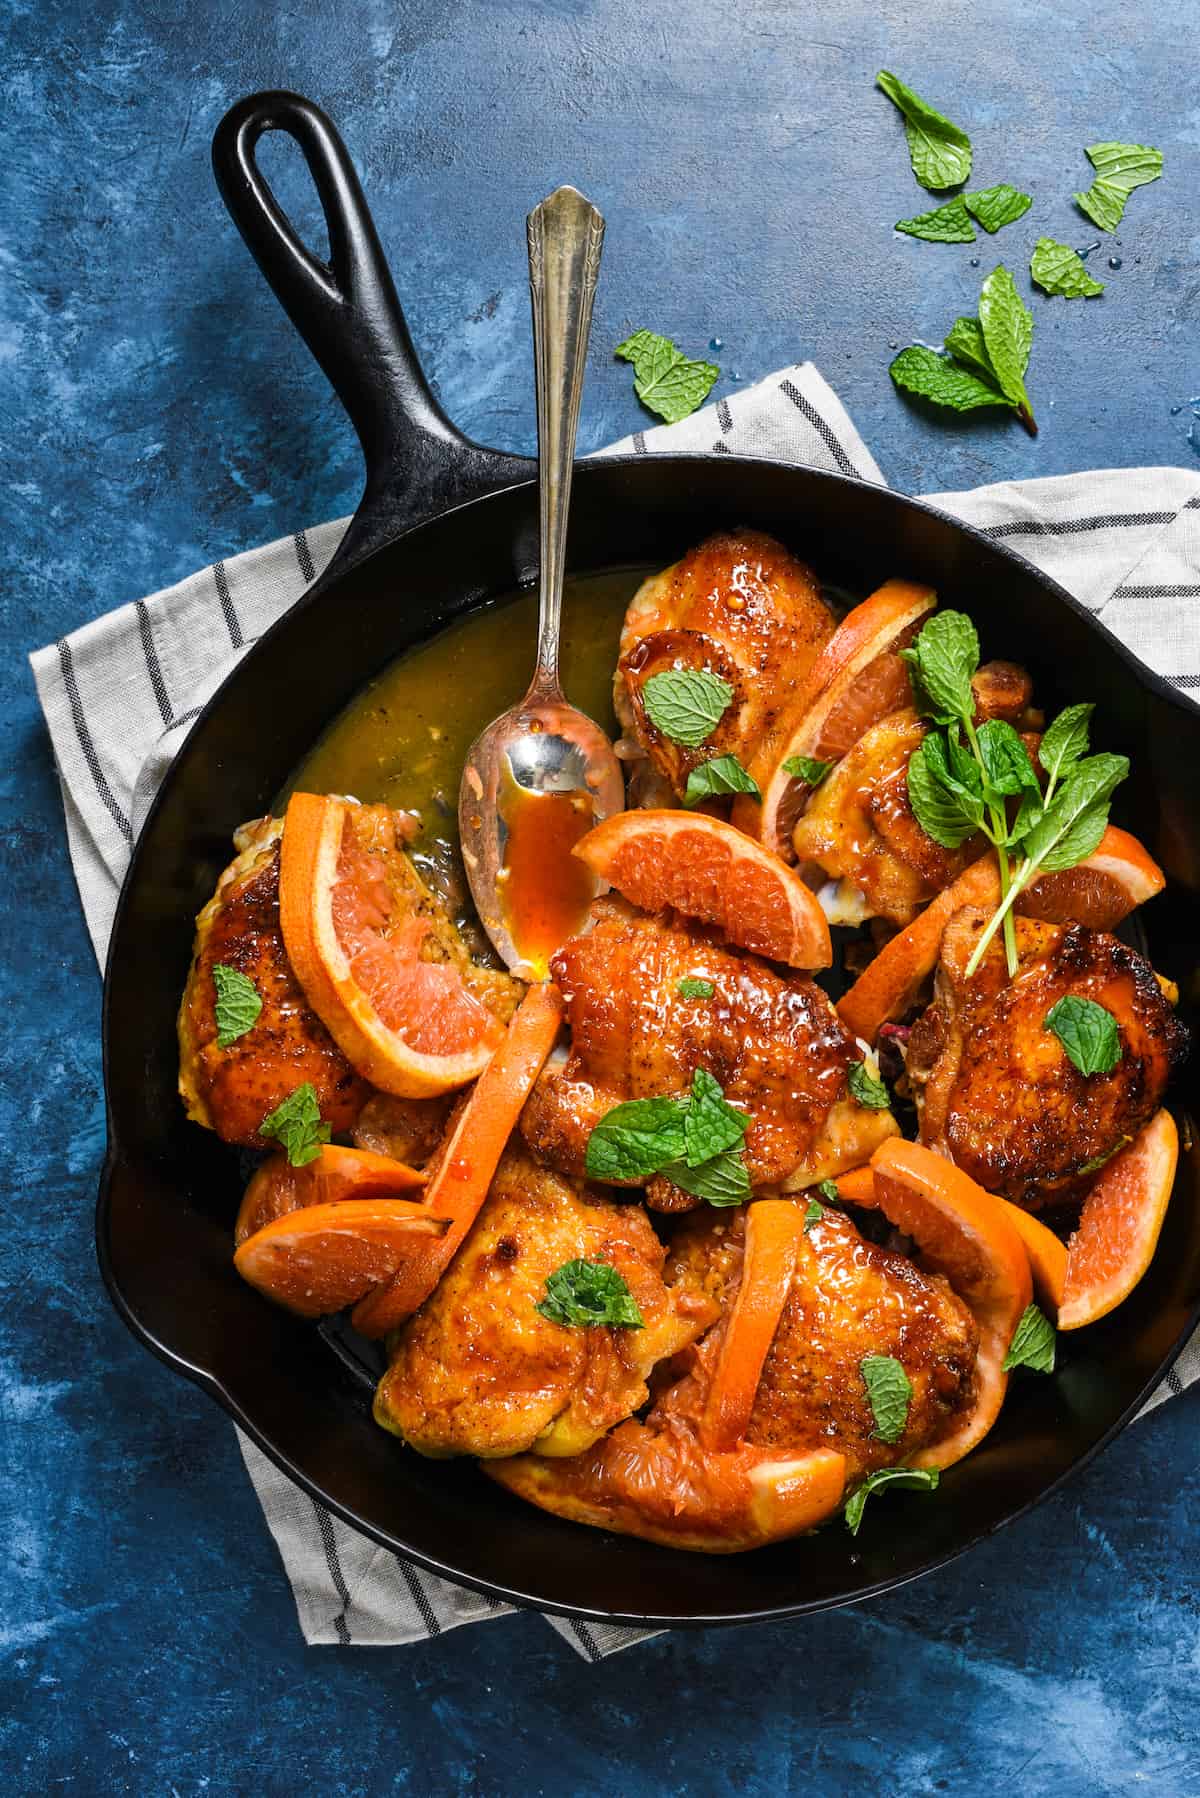 Roasted Chicken Thighs with Grapefruit-Honey Glaze + 11 Grapefruit Recipes to Brighten Your Winter - Bring some happy flavor to a cold day with an appetizer, cocktail, breakfast, salad, lunch or dinner celebrating juicy, sweet grapefruit! | foxeslovelemons.com